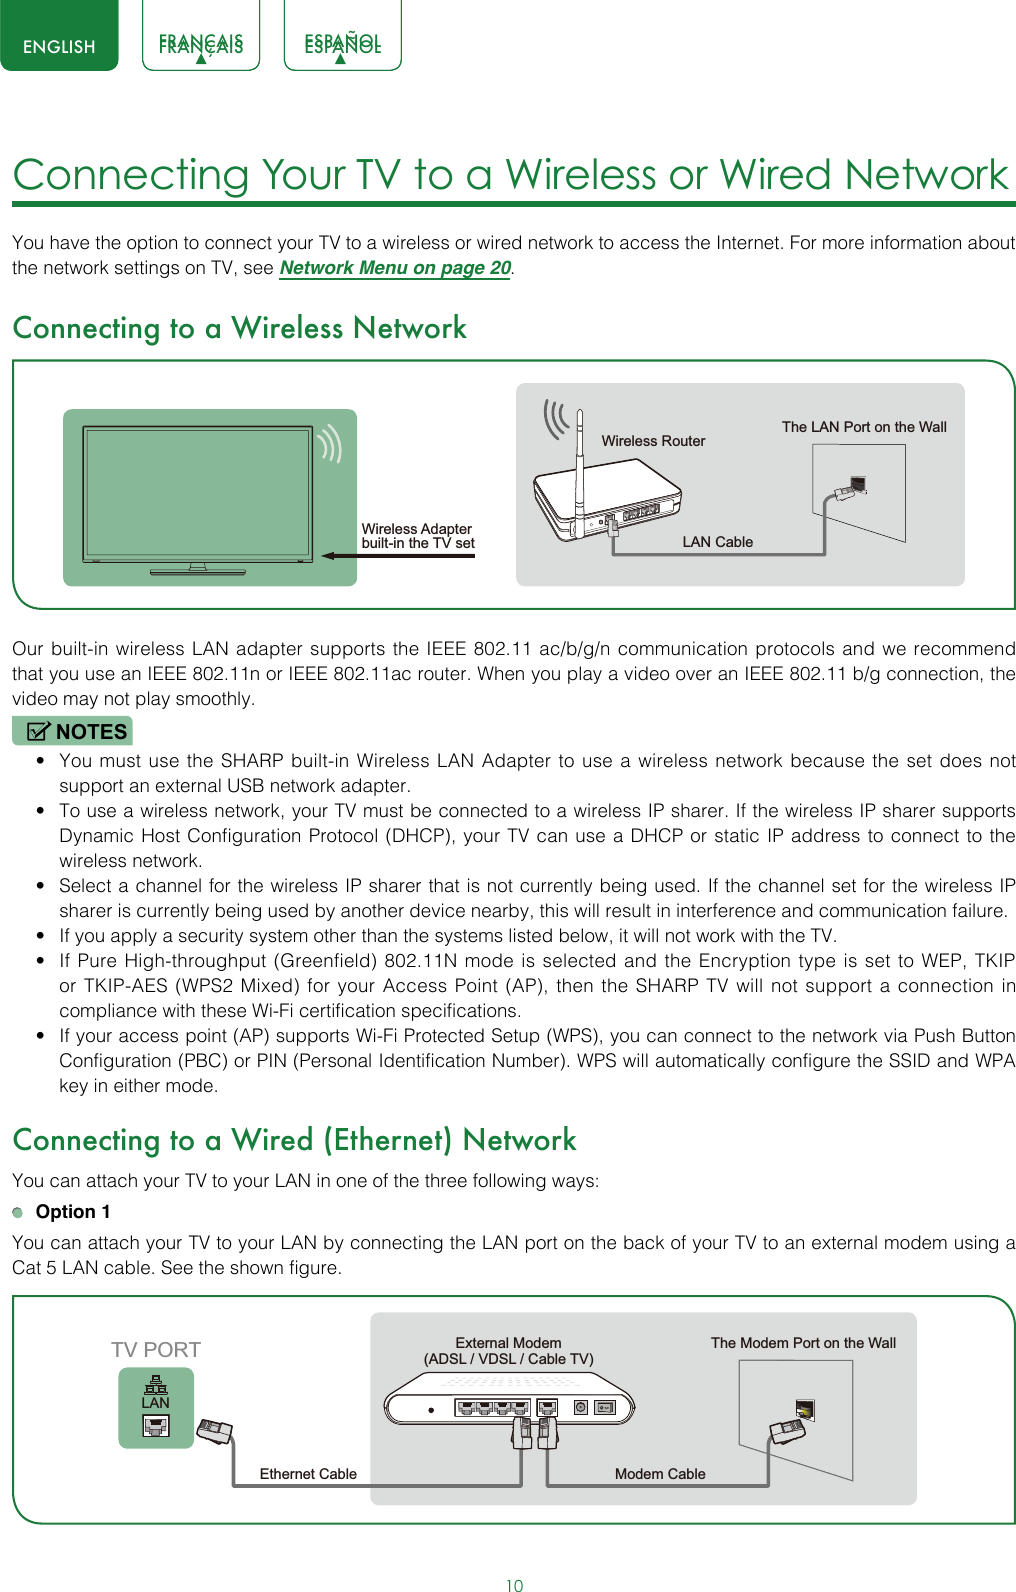 ENGLISH FRANÇAIS ESPAÑOLENGLISH FRANÇAIS ESPAÑOL10Connecting Your TV to a Wireless or Wired Network You have the option to connect your TV to a wireless or wired network to access the Internet. For more information about the network settings on TV, see Network Menu on page 20.Connecting to a Wireless Network Our built-in wireless LAN adapter supports the IEEE 802.11 ac/b/g/n communication protocols and we recommend that you use an IEEE 802.11n or IEEE 802.11ac router. When you play a video over an IEEE 802.11 b/g connection, the video may not play smoothly.NOTES• You must use the SHARP built-in Wireless LAN Adapter to use a wireless network because the set does not support an external USB network adapter.• To use a wireless network, your TV must be connected to a wireless IP sharer. If the wireless IP sharer supports Dynamic Host Configuration Protocol (DHCP), your TV can use a DHCP or static IP address to connect to the wireless network.• Select a channel for the wireless IP sharer that is not currently being used. If the channel set for the wireless IP sharer is currently being used by another device nearby, this will result in interference and communication failure.• If you apply a security system other than the systems listed below, it will not work with the TV.• If Pure High-throughput (Greenfield) 802.11N mode is selected and the Encryption type is set to WEP, TKIP or TKIP-AES (WPS2 Mixed) for your Access Point (AP), then the SHARP TV will not support a connection in compliance with these Wi-Fi certification specifications.• If your access point (AP) supports Wi-Fi Protected Setup (WPS), you can connect to the network via Push Button Configuration (PBC) or PIN (Personal Identification Number). WPS will automatically configure the SSID and WPA key in either mode.Connecting to a Wired (Ethernet) NetworkYou can attach your TV to your LAN in one of the three following ways: Option 1You can attach your TV to your LAN by connecting the LAN port on the back of your TV to an external modem using a Cat 5 LAN cable. See the shown figure. Wireless Adapterbuilt-in the TV set  LAN CableWireless Router The LAN Port on the WallExternal Modem(ADSL / VDSL / Cable TV)  The Modem Port on the WallEthernet Cable  Modem Cable LANTV PORT